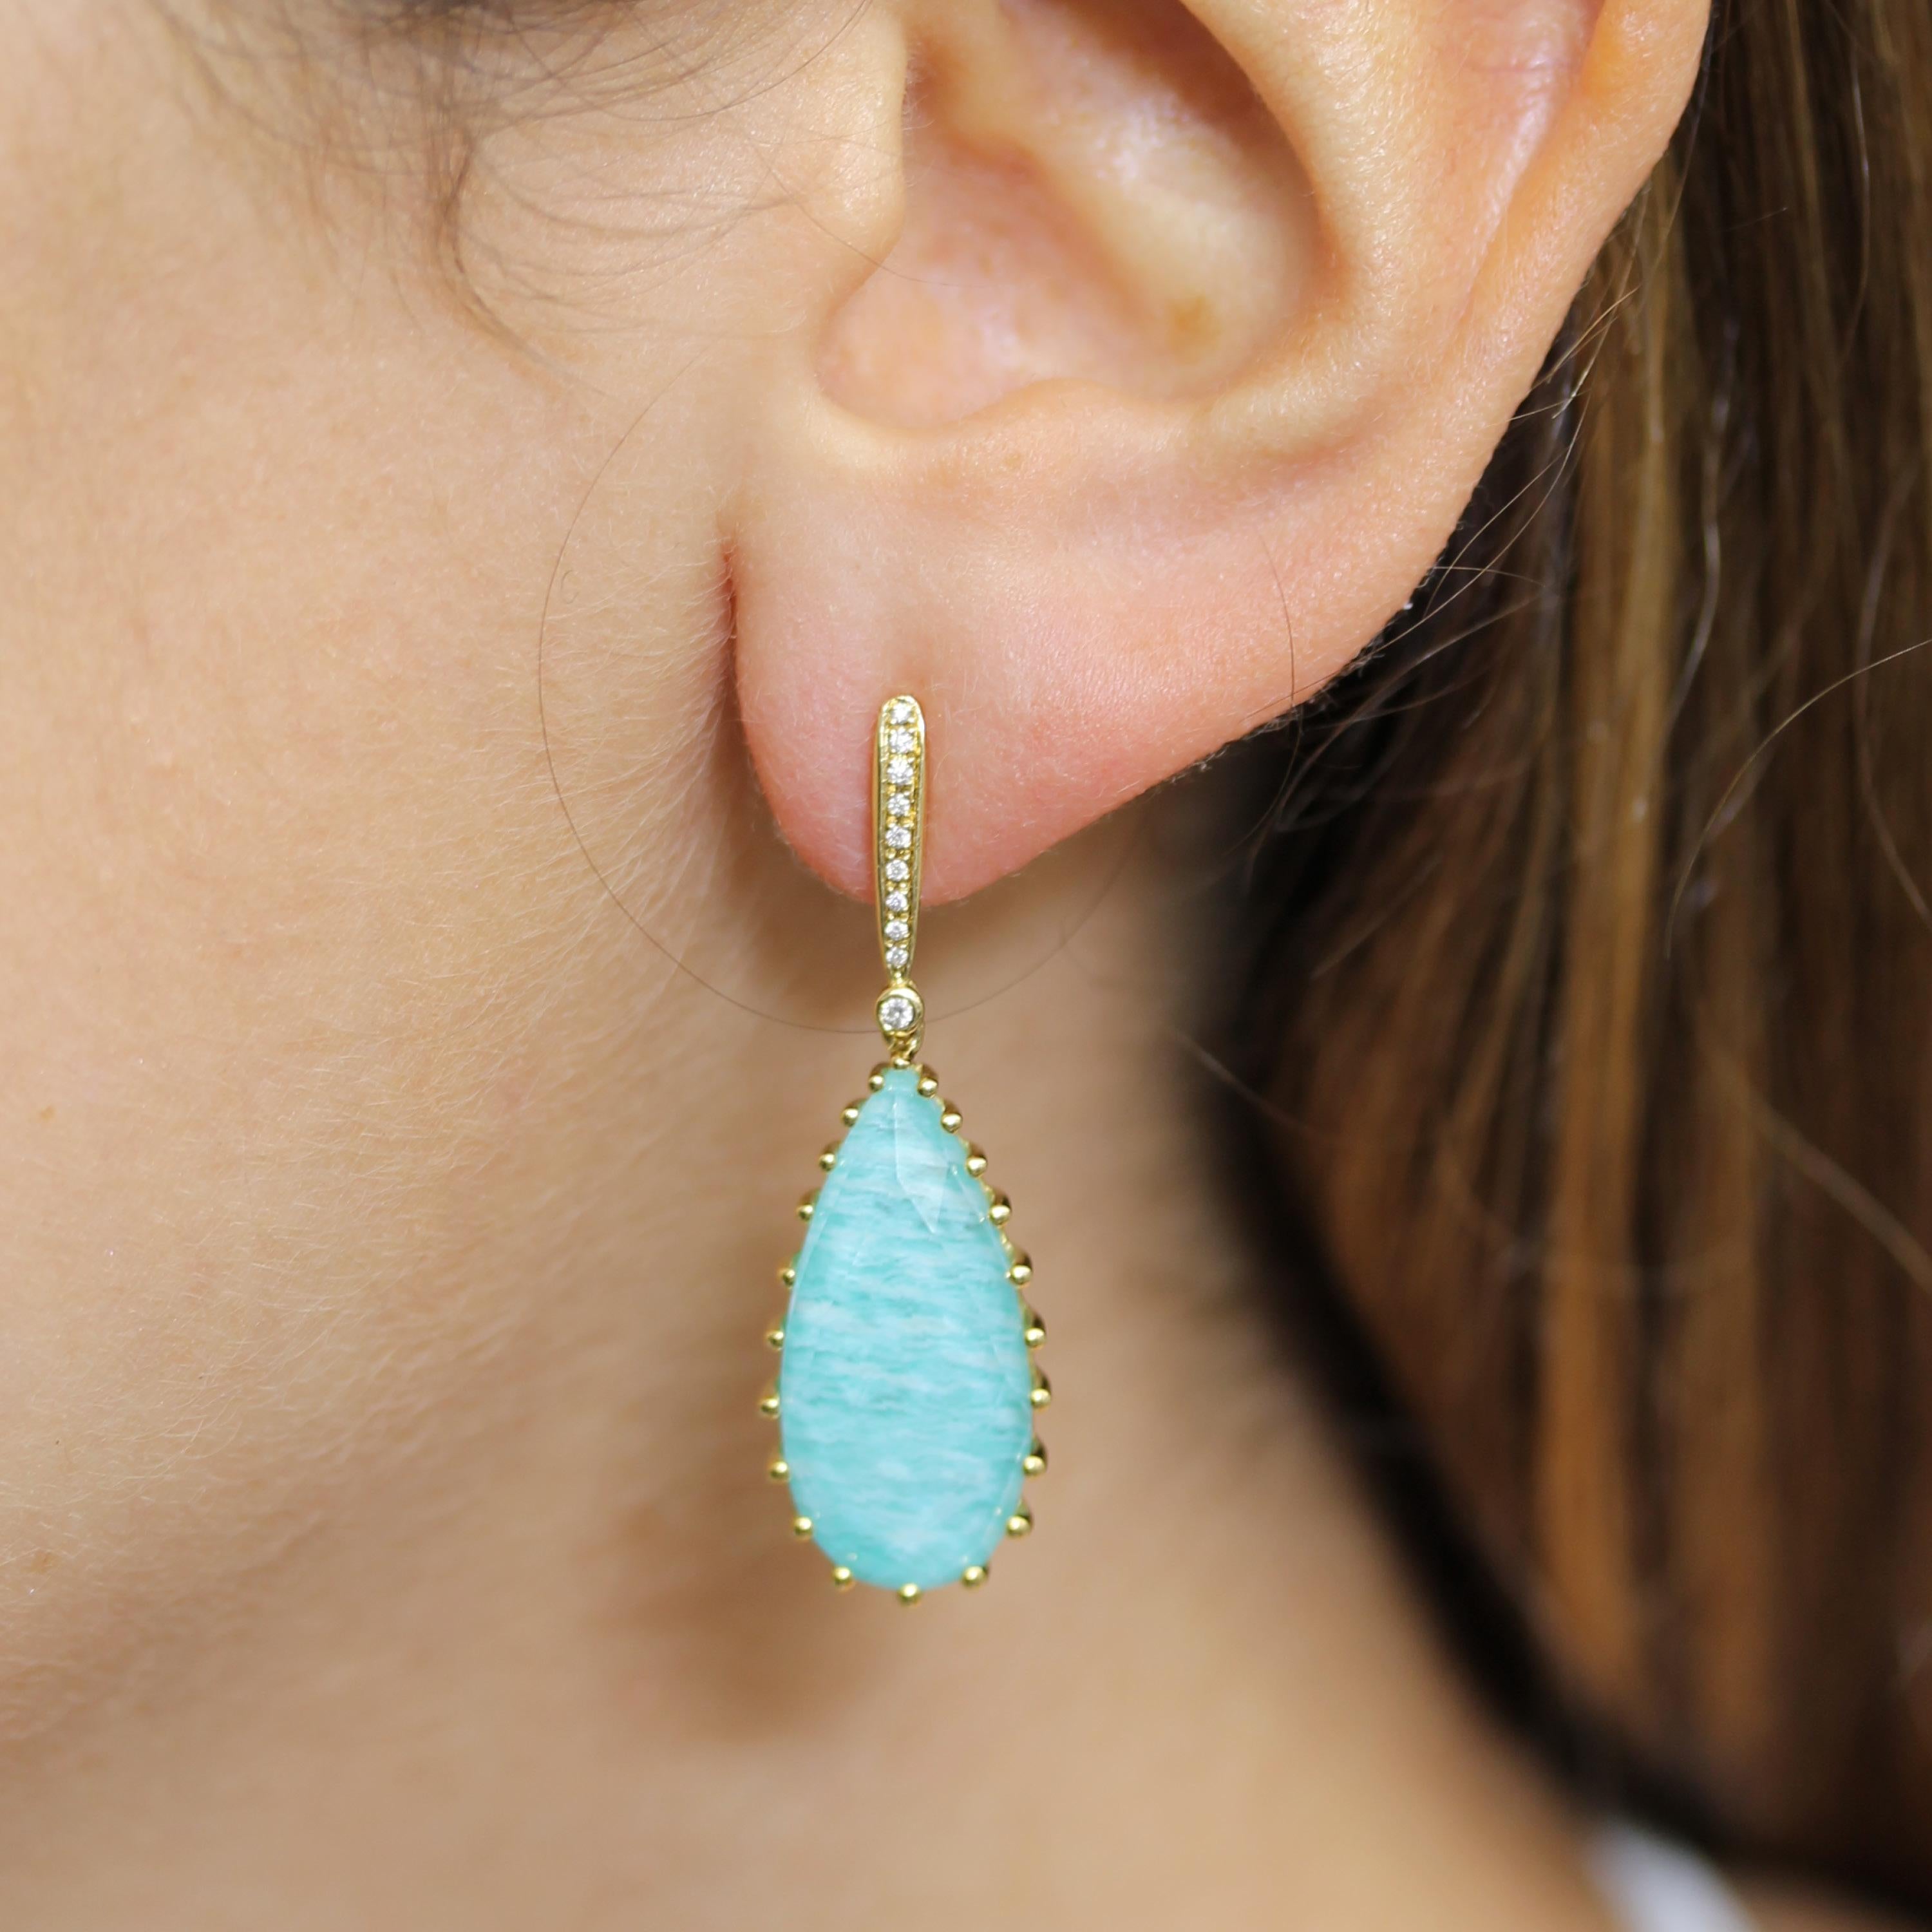 18K Yellow Gold Earrings featuring a doublet of Pear-shape, Checker-Cut White Quartz layered with Amazonite, prong-set, with Diamond Post & Pushback tops. Amazonite, known as 